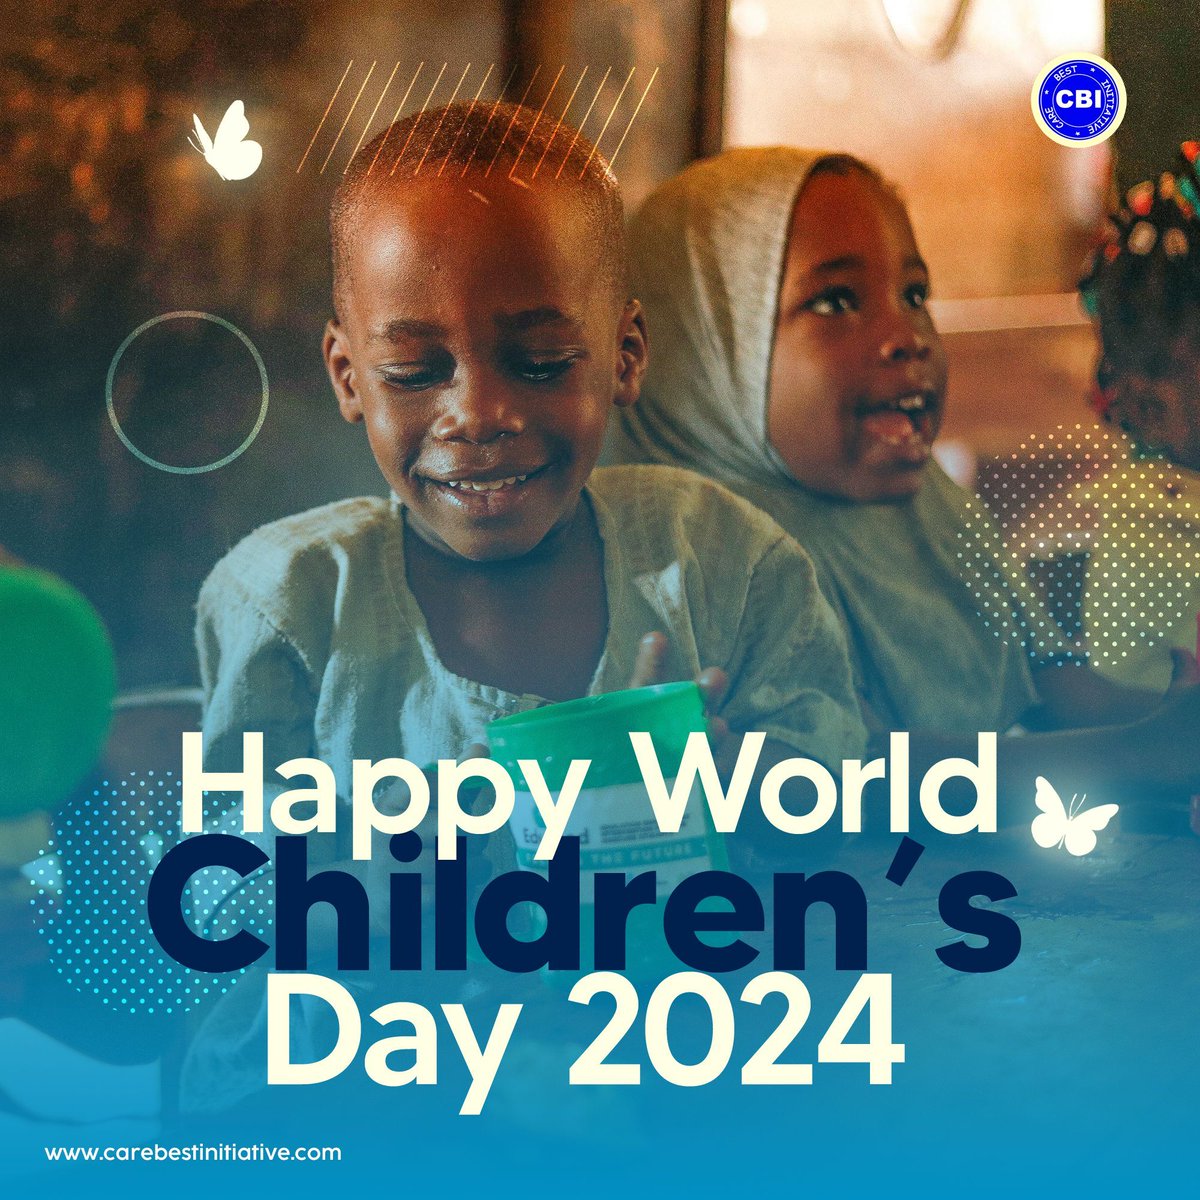 Happy World Children's Day! 🌍✨
Today, we celebrate the boundless potential and bright futures of children everywhere. Let's work together to ensure every child has the opportunity to thrive. #WorldChildrensDay #ForEveryChild #ChildrensRights #Humanitarian #CareBestInitiative